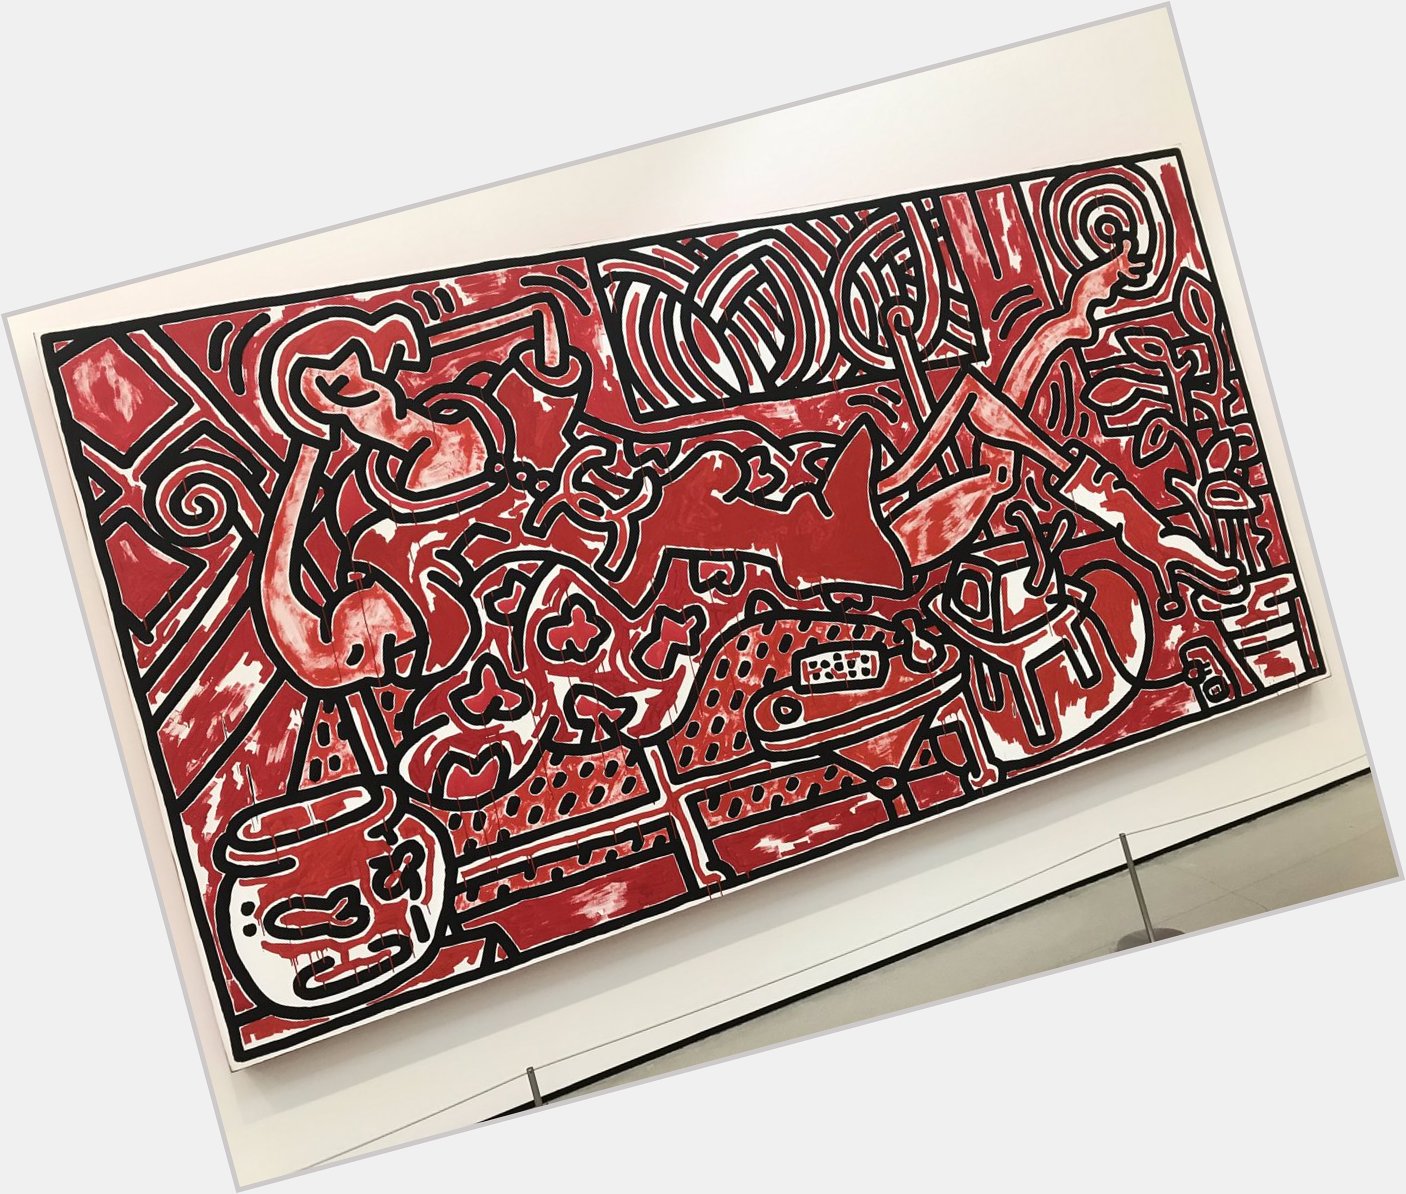 Happy Birthday to Keith Haring! I got the chance to see this piece Red Room last week at    